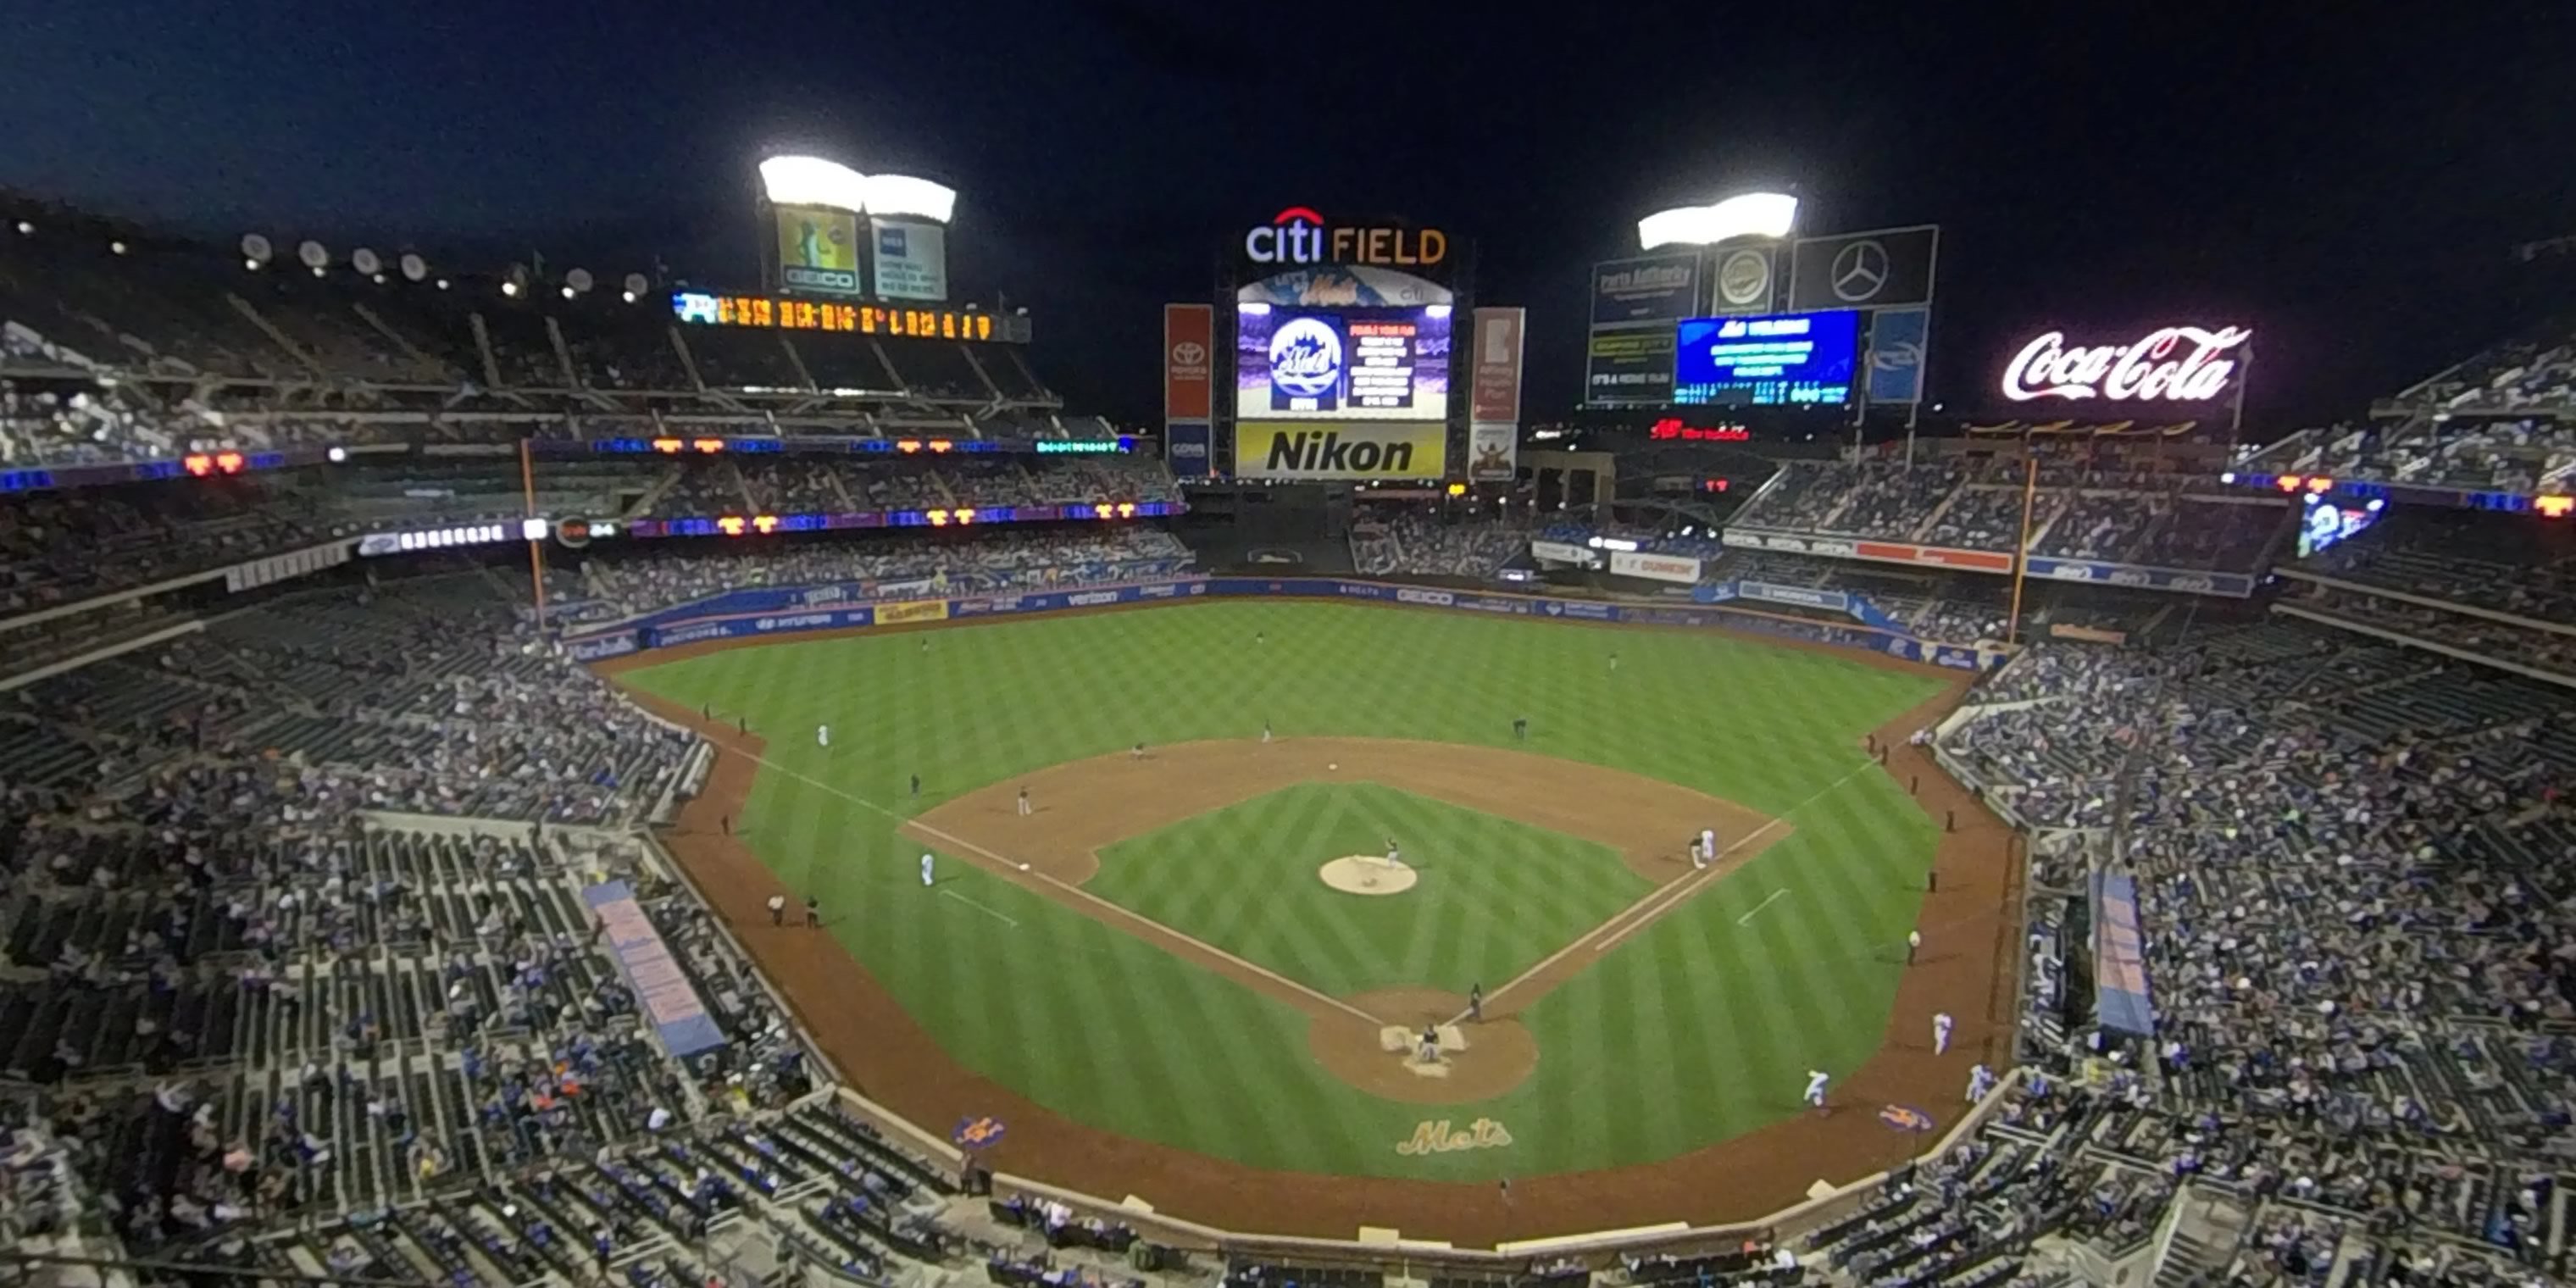 section 416 panoramic seat view  - citi field